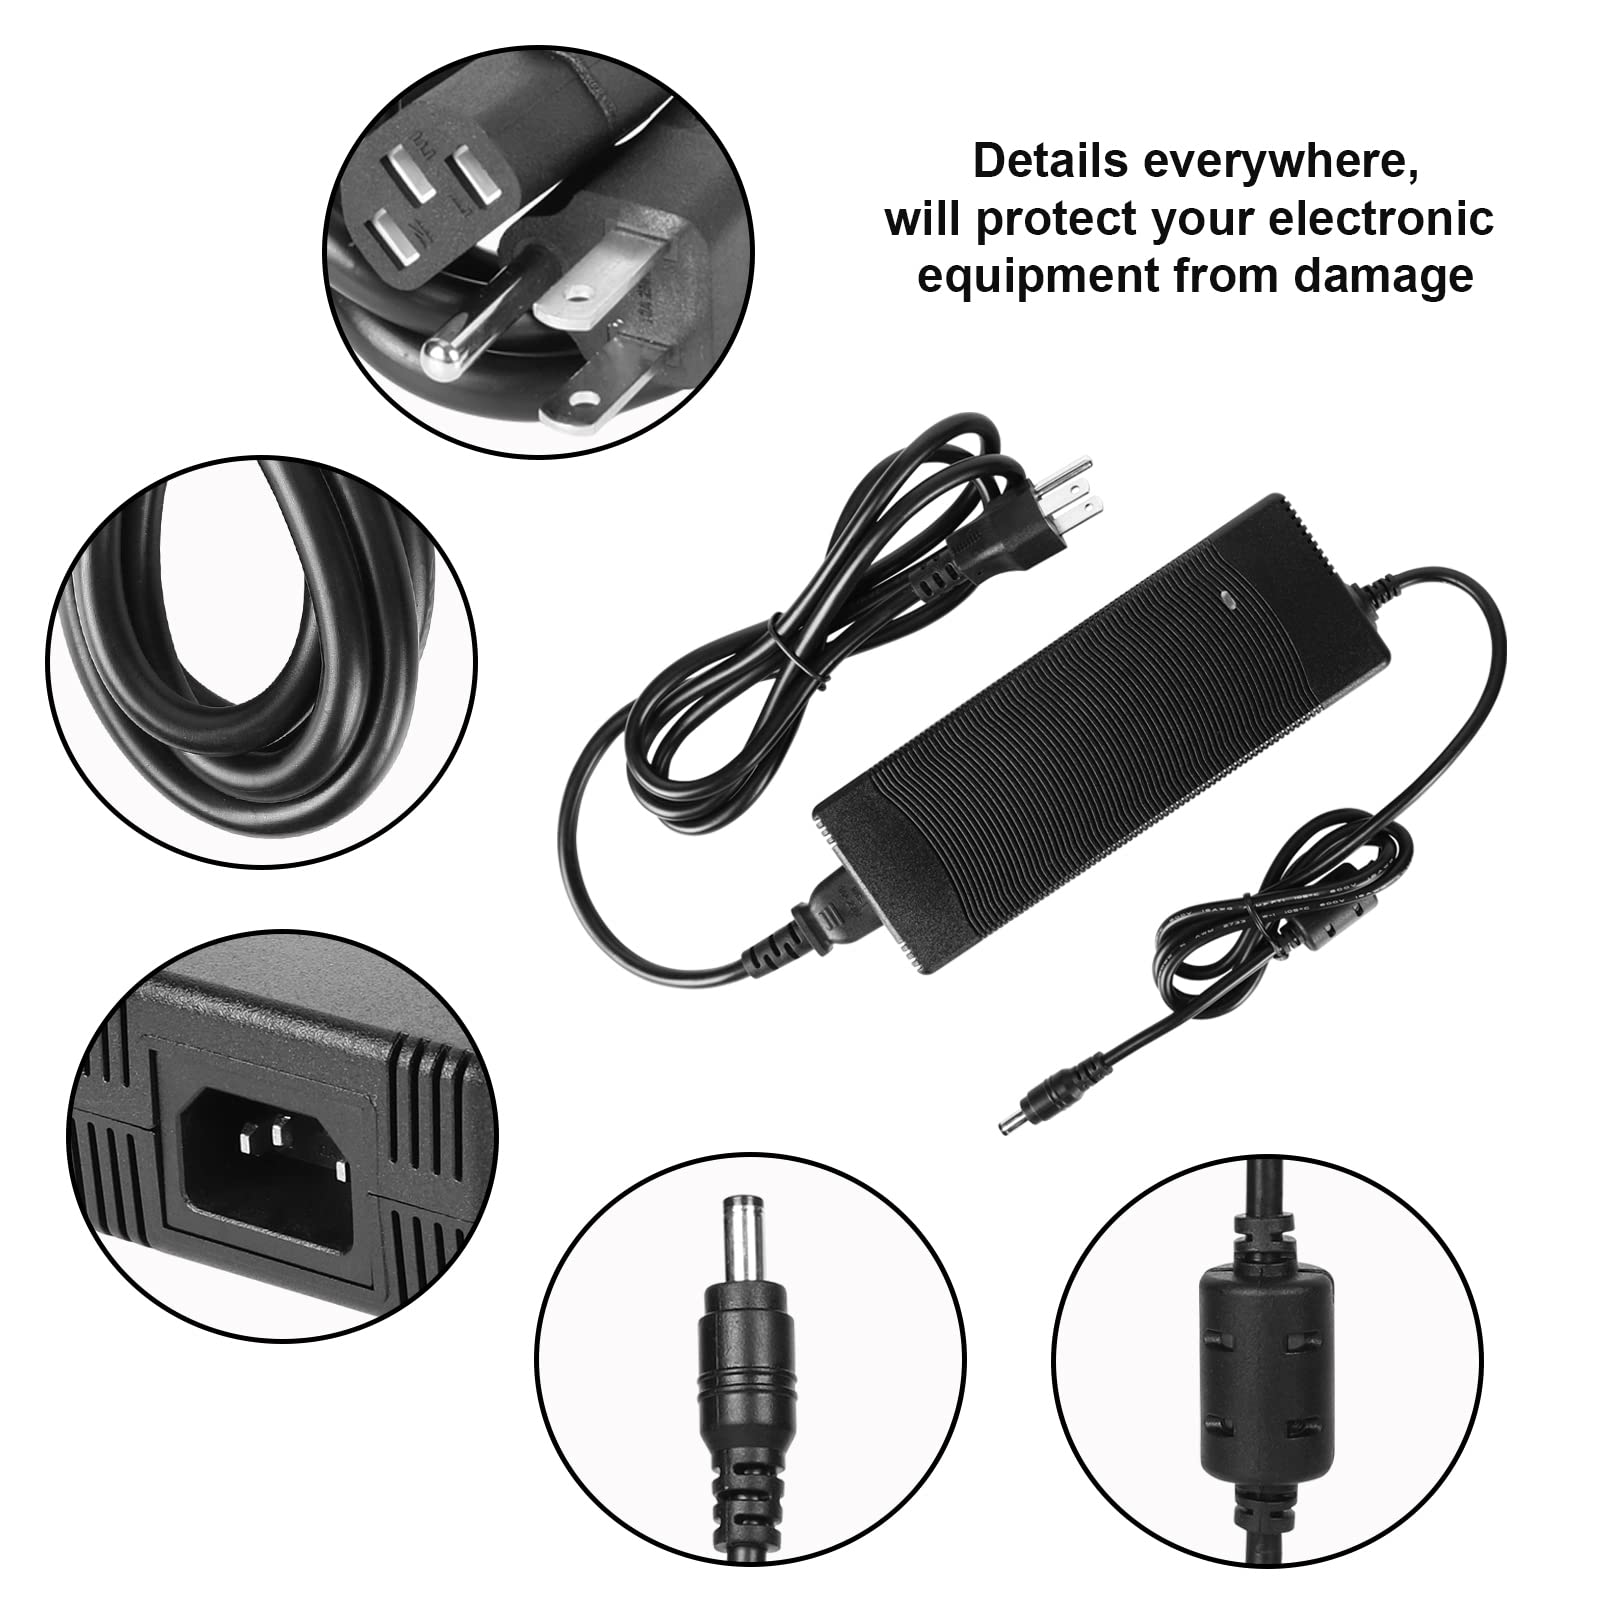 24V 8A Power Supply Adapter, AC to DC Converter AC 100V ~ 240V to DC 24 Volt 8 Amp 192W Switching Transformer LED Driver with 5.5mm x 2.1/2.5mm DC Jack Connector for Car Cigarette Lighter LCD Monitor